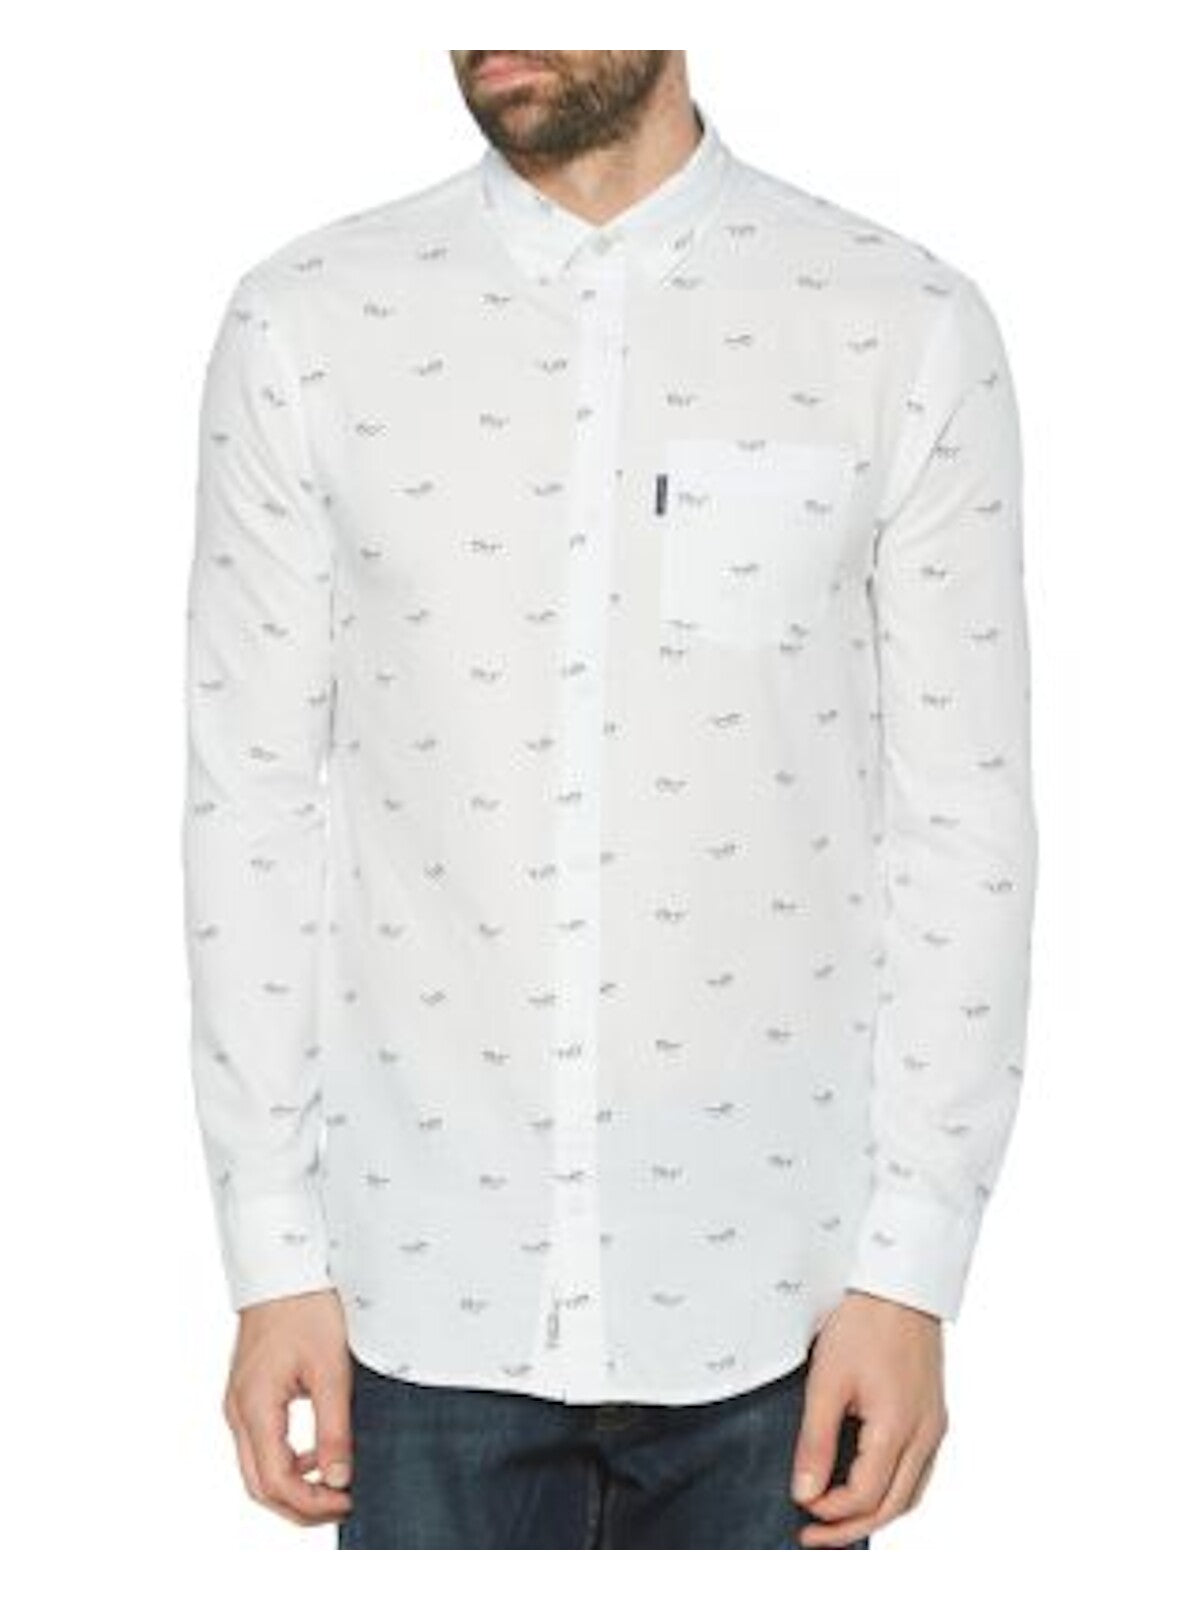 PENGUIN Mens White Printed Collared Classic Fit Shirt XL